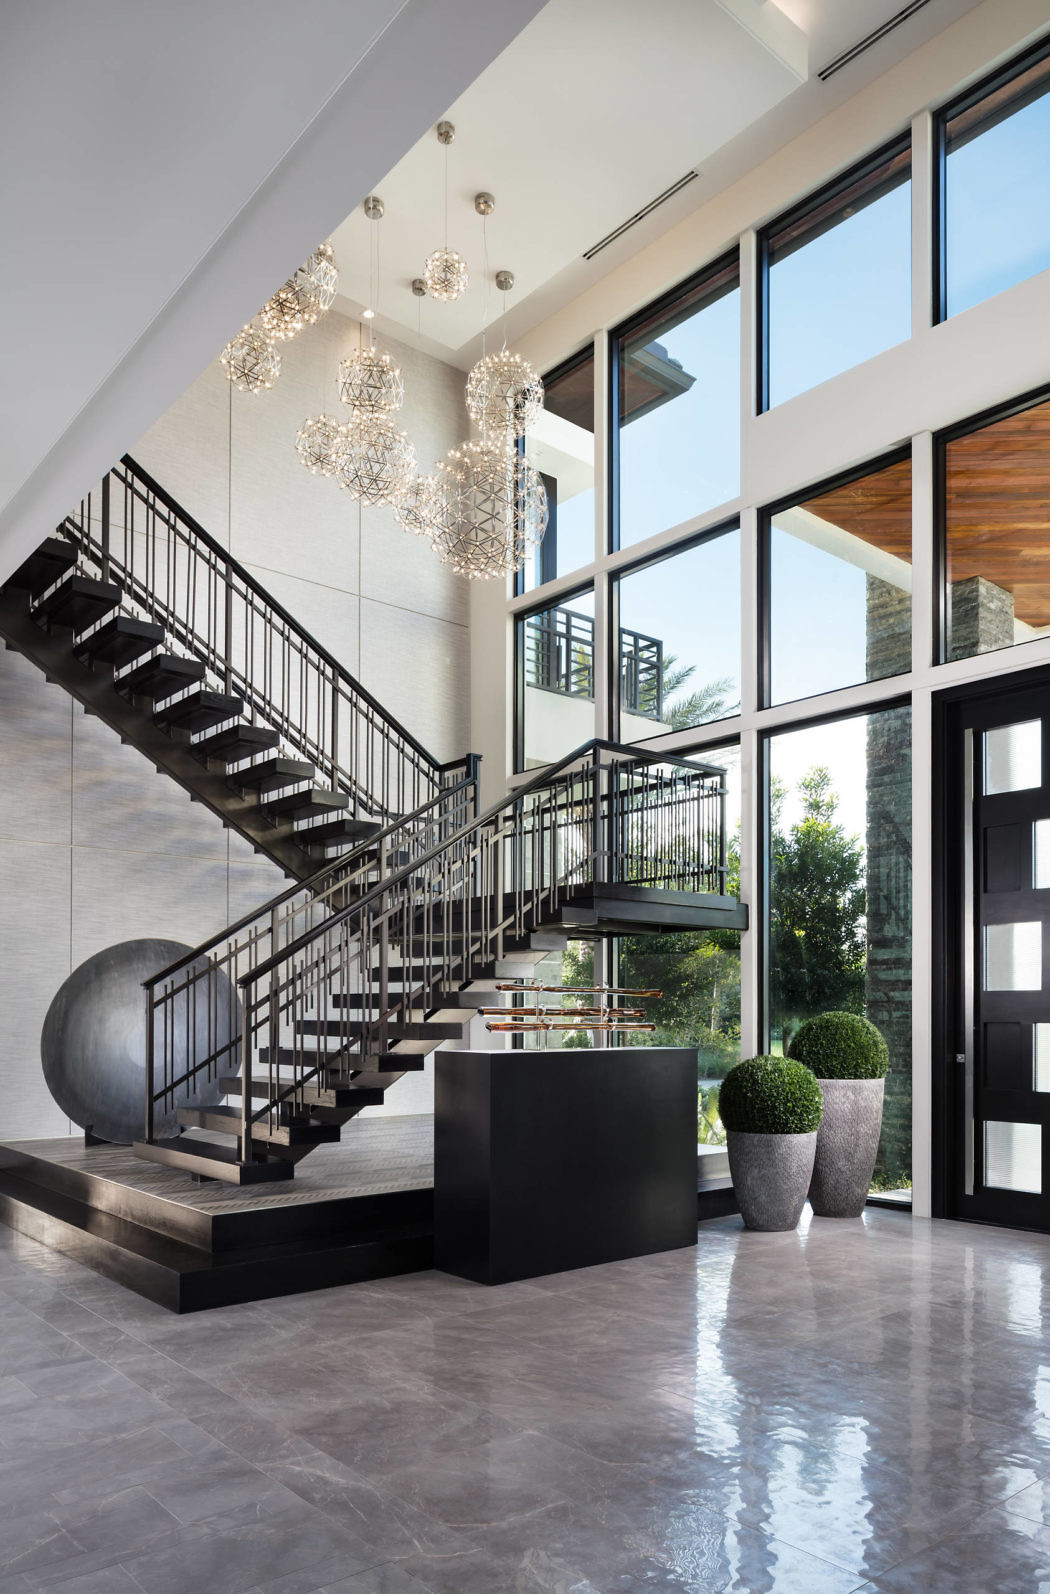 Elegant foyer with a modern staircase, large windows, and chandeliers.